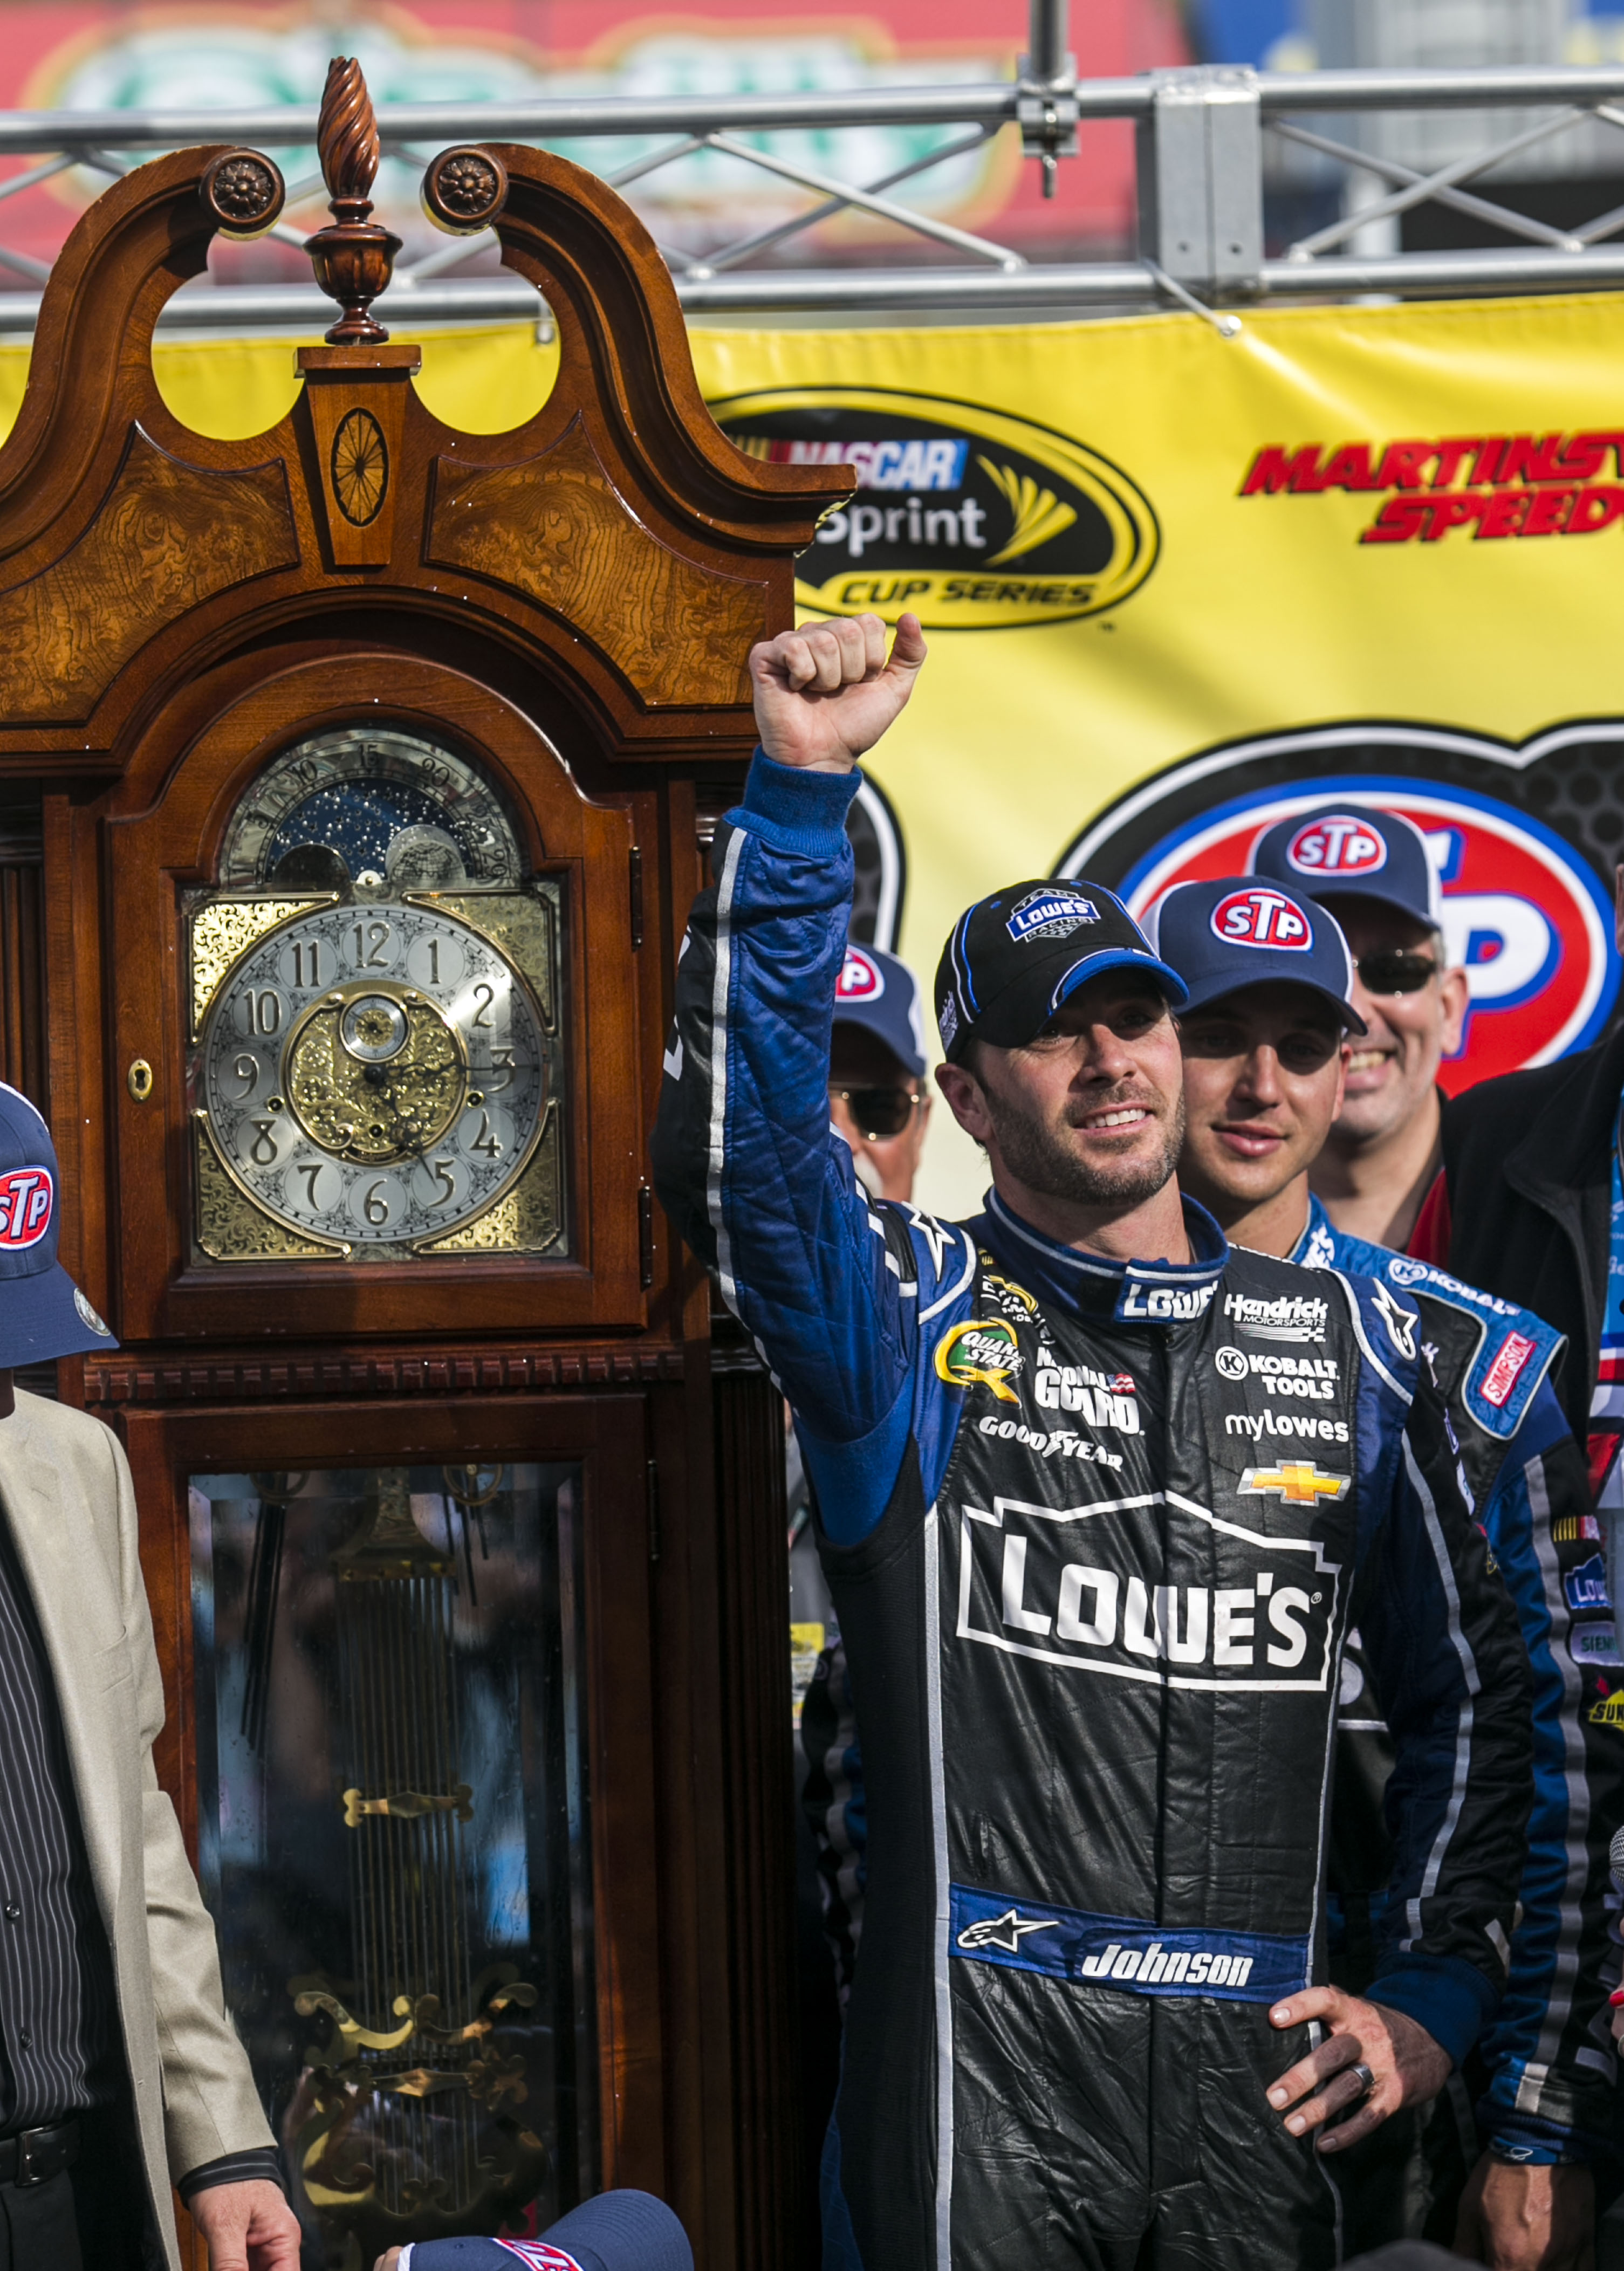 Apr 7, 2013; Martinsville, VA, USA; NASCAR Sprint Cup Series driver Jimmie Johnson (48) celebrates winning the STP Gas Booster 500 at Martinsville Speedway. Mandatory Credit: Peter Casey-USA TODAY Sports ORG XMIT: USATSI-128780 ORIG FILE ID: 20130407_pjc_bc1_181.jpg